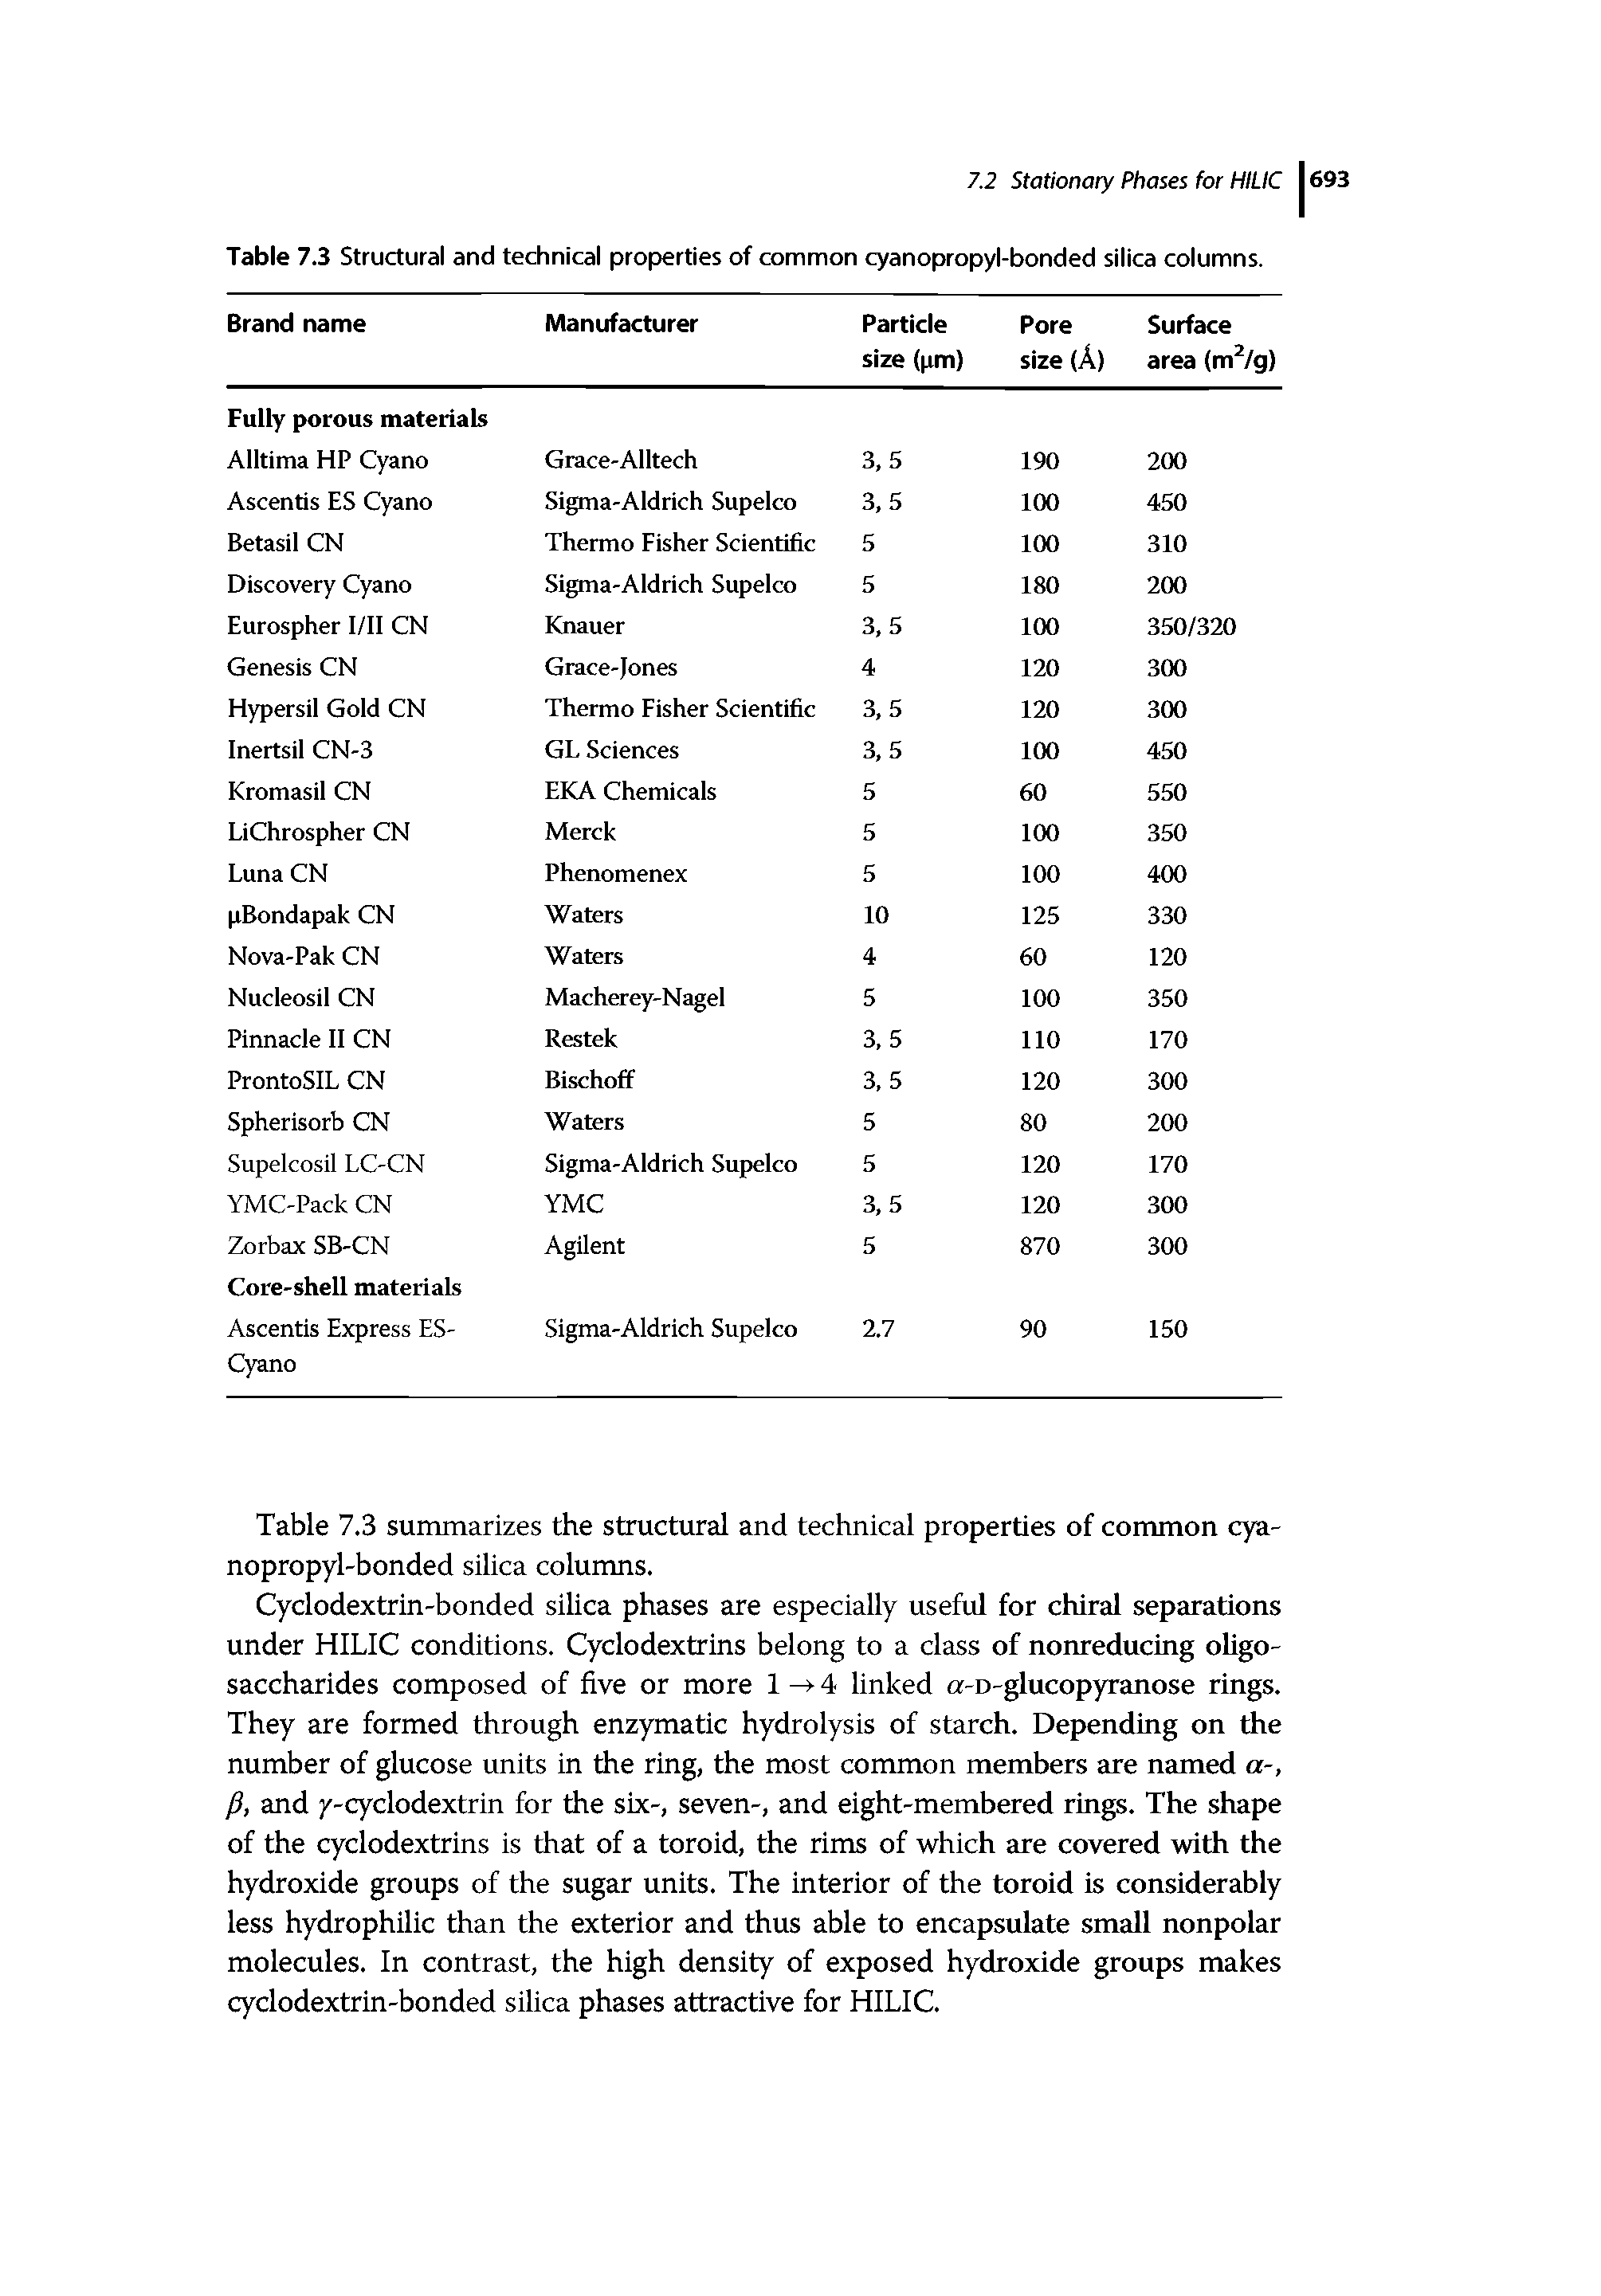 Table 7.3 Structural and technical properties of common cyanopropyl-bonded silica columns.